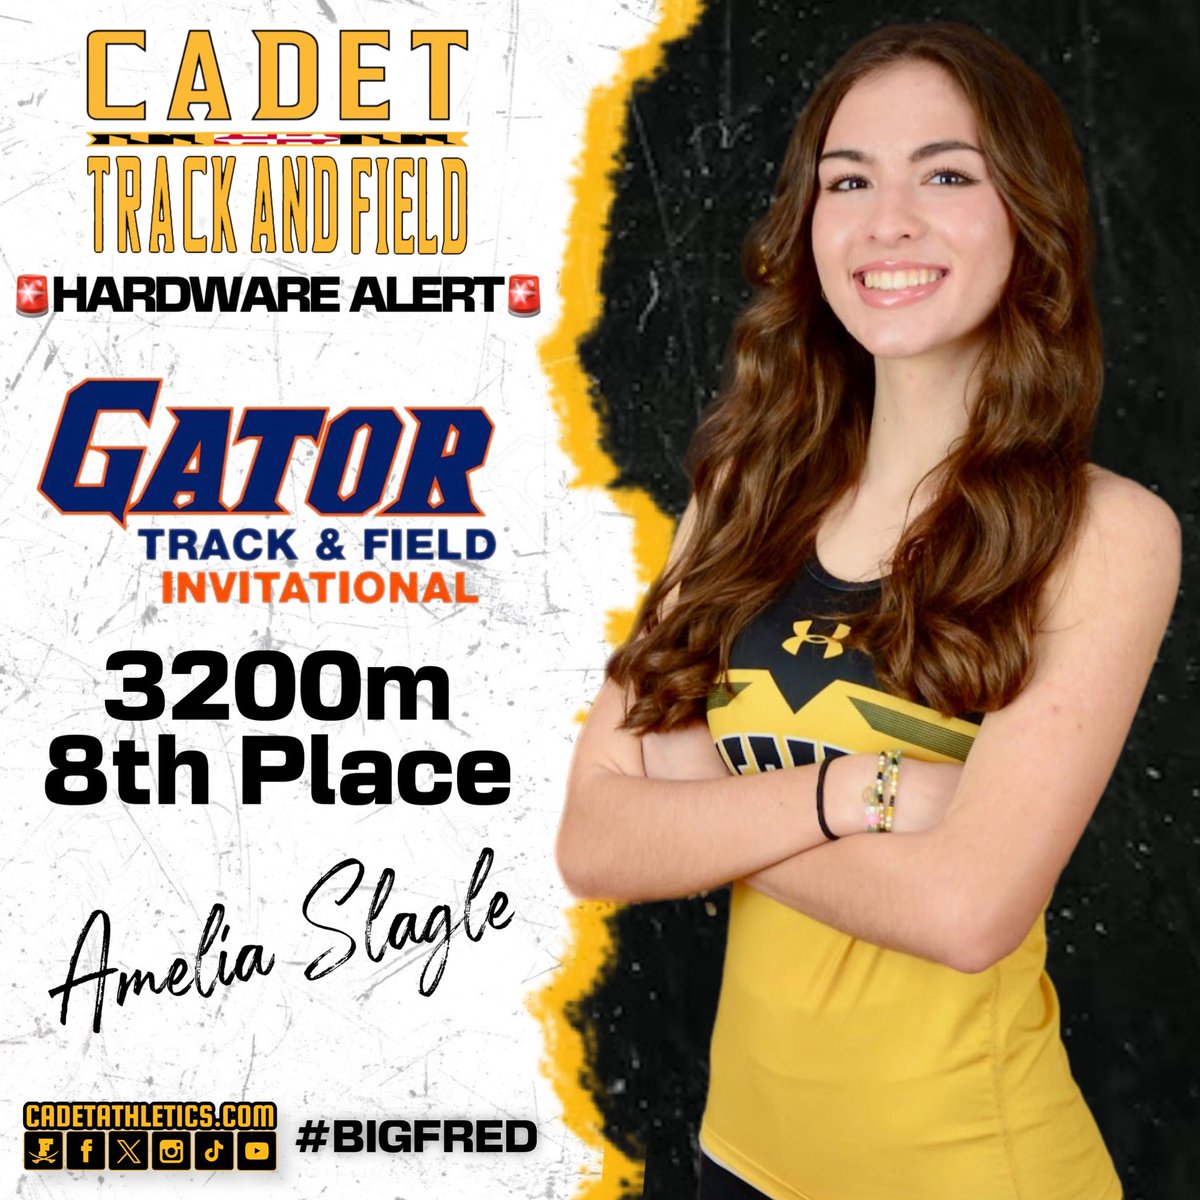 ⚡️Cadetathletics.com Breaking News 
🏅🚨HARDWARE ALERT🚨🏅

Cadet Amelia Slagle places 8th in the 3200m race  at the Gator Invitational today at Reservoir High School with a time of 11:23.68.

⚔️ | #BigFred | ⬛️🟨 | #ProtectTheParkway